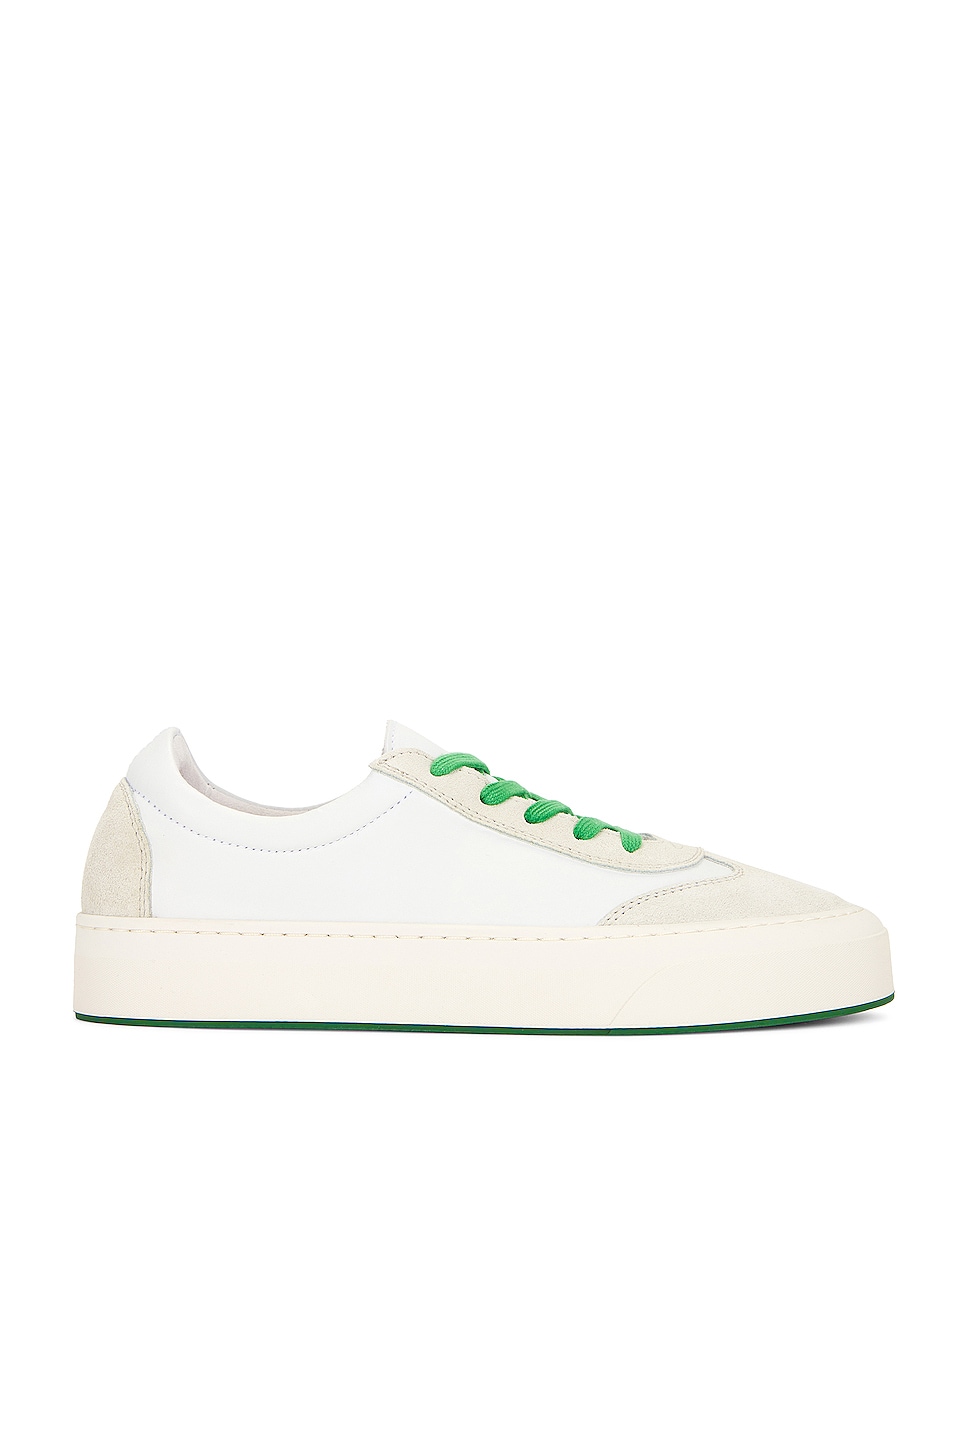 Image 1 of The Row Marley Lace Up Sneaker in Milk & Milk